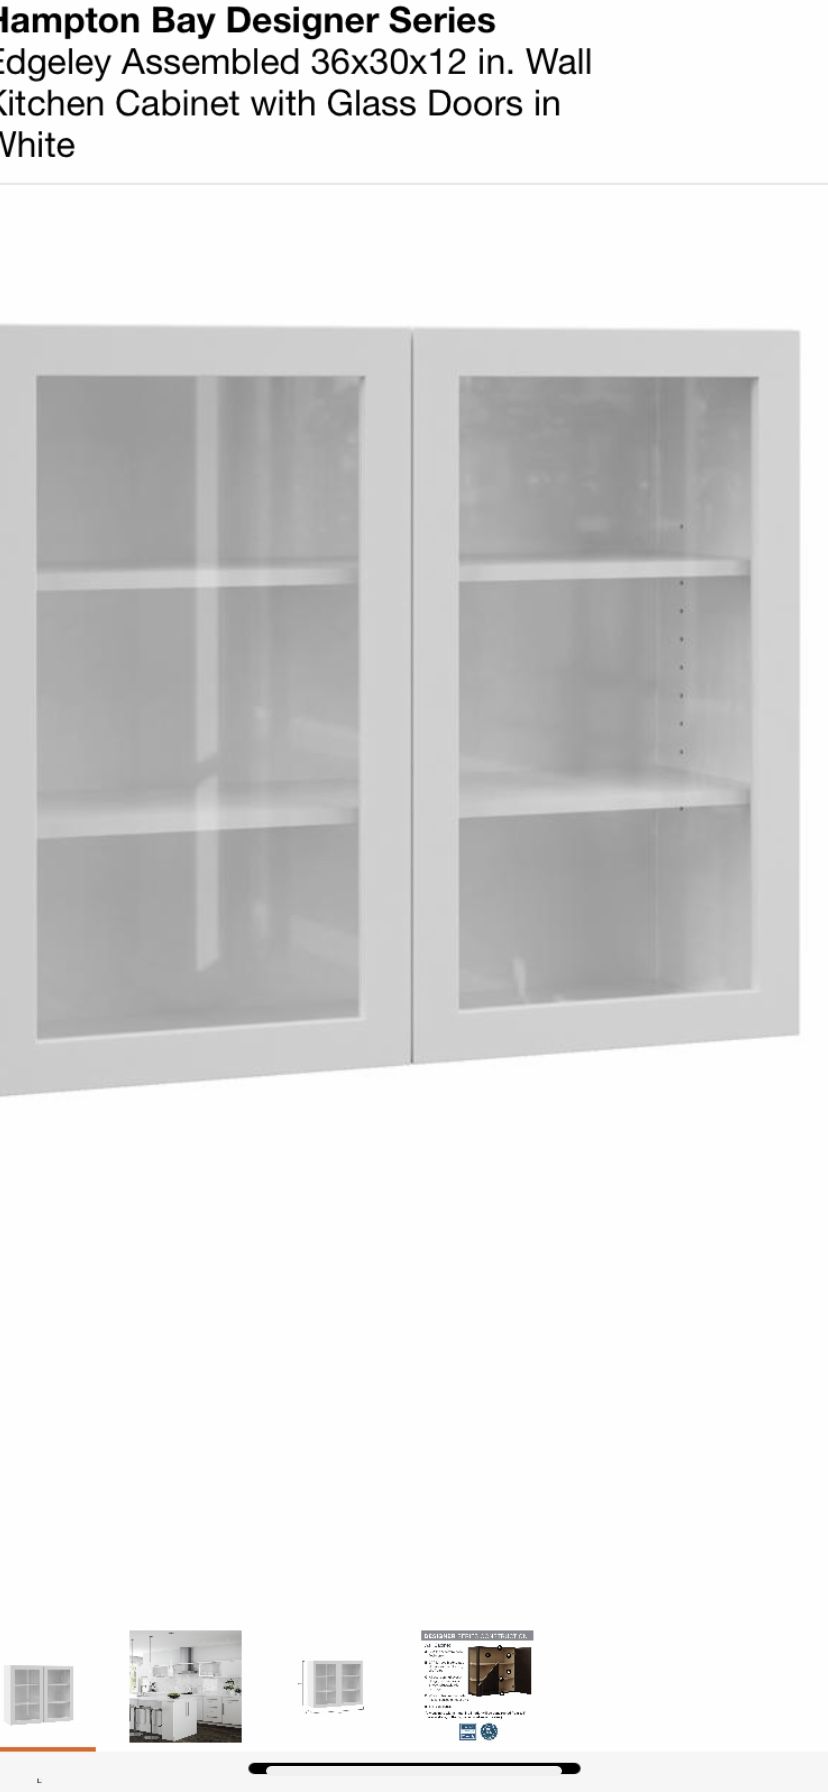 Hampton Bay Designer Series Edgeley Assembled 36x30x12 in. Wall Kitchen Cabinet with Glass Doors in White